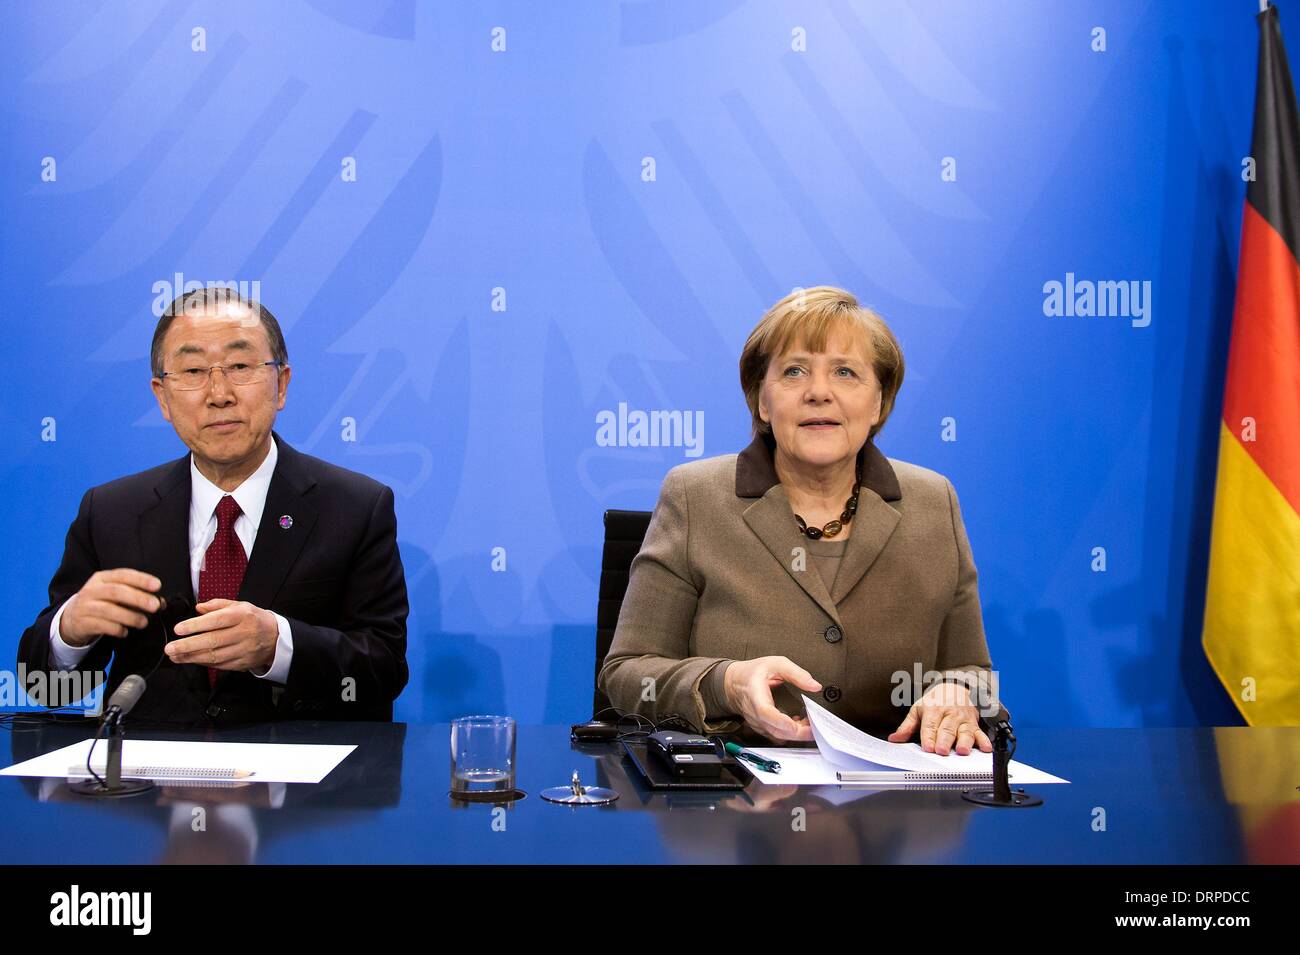 Berlin, Germany. 30th Jan, 2014. German Chancellor Angela Merkel (R) and UN Secretary-General Ban Ki-Moon attend a press conference after their meeting at the chancellery in Berlin, Germany, Jan. 30, 2014. Credit:  Goncalo Silva/Xinhua/Alamy Live News Stock Photo